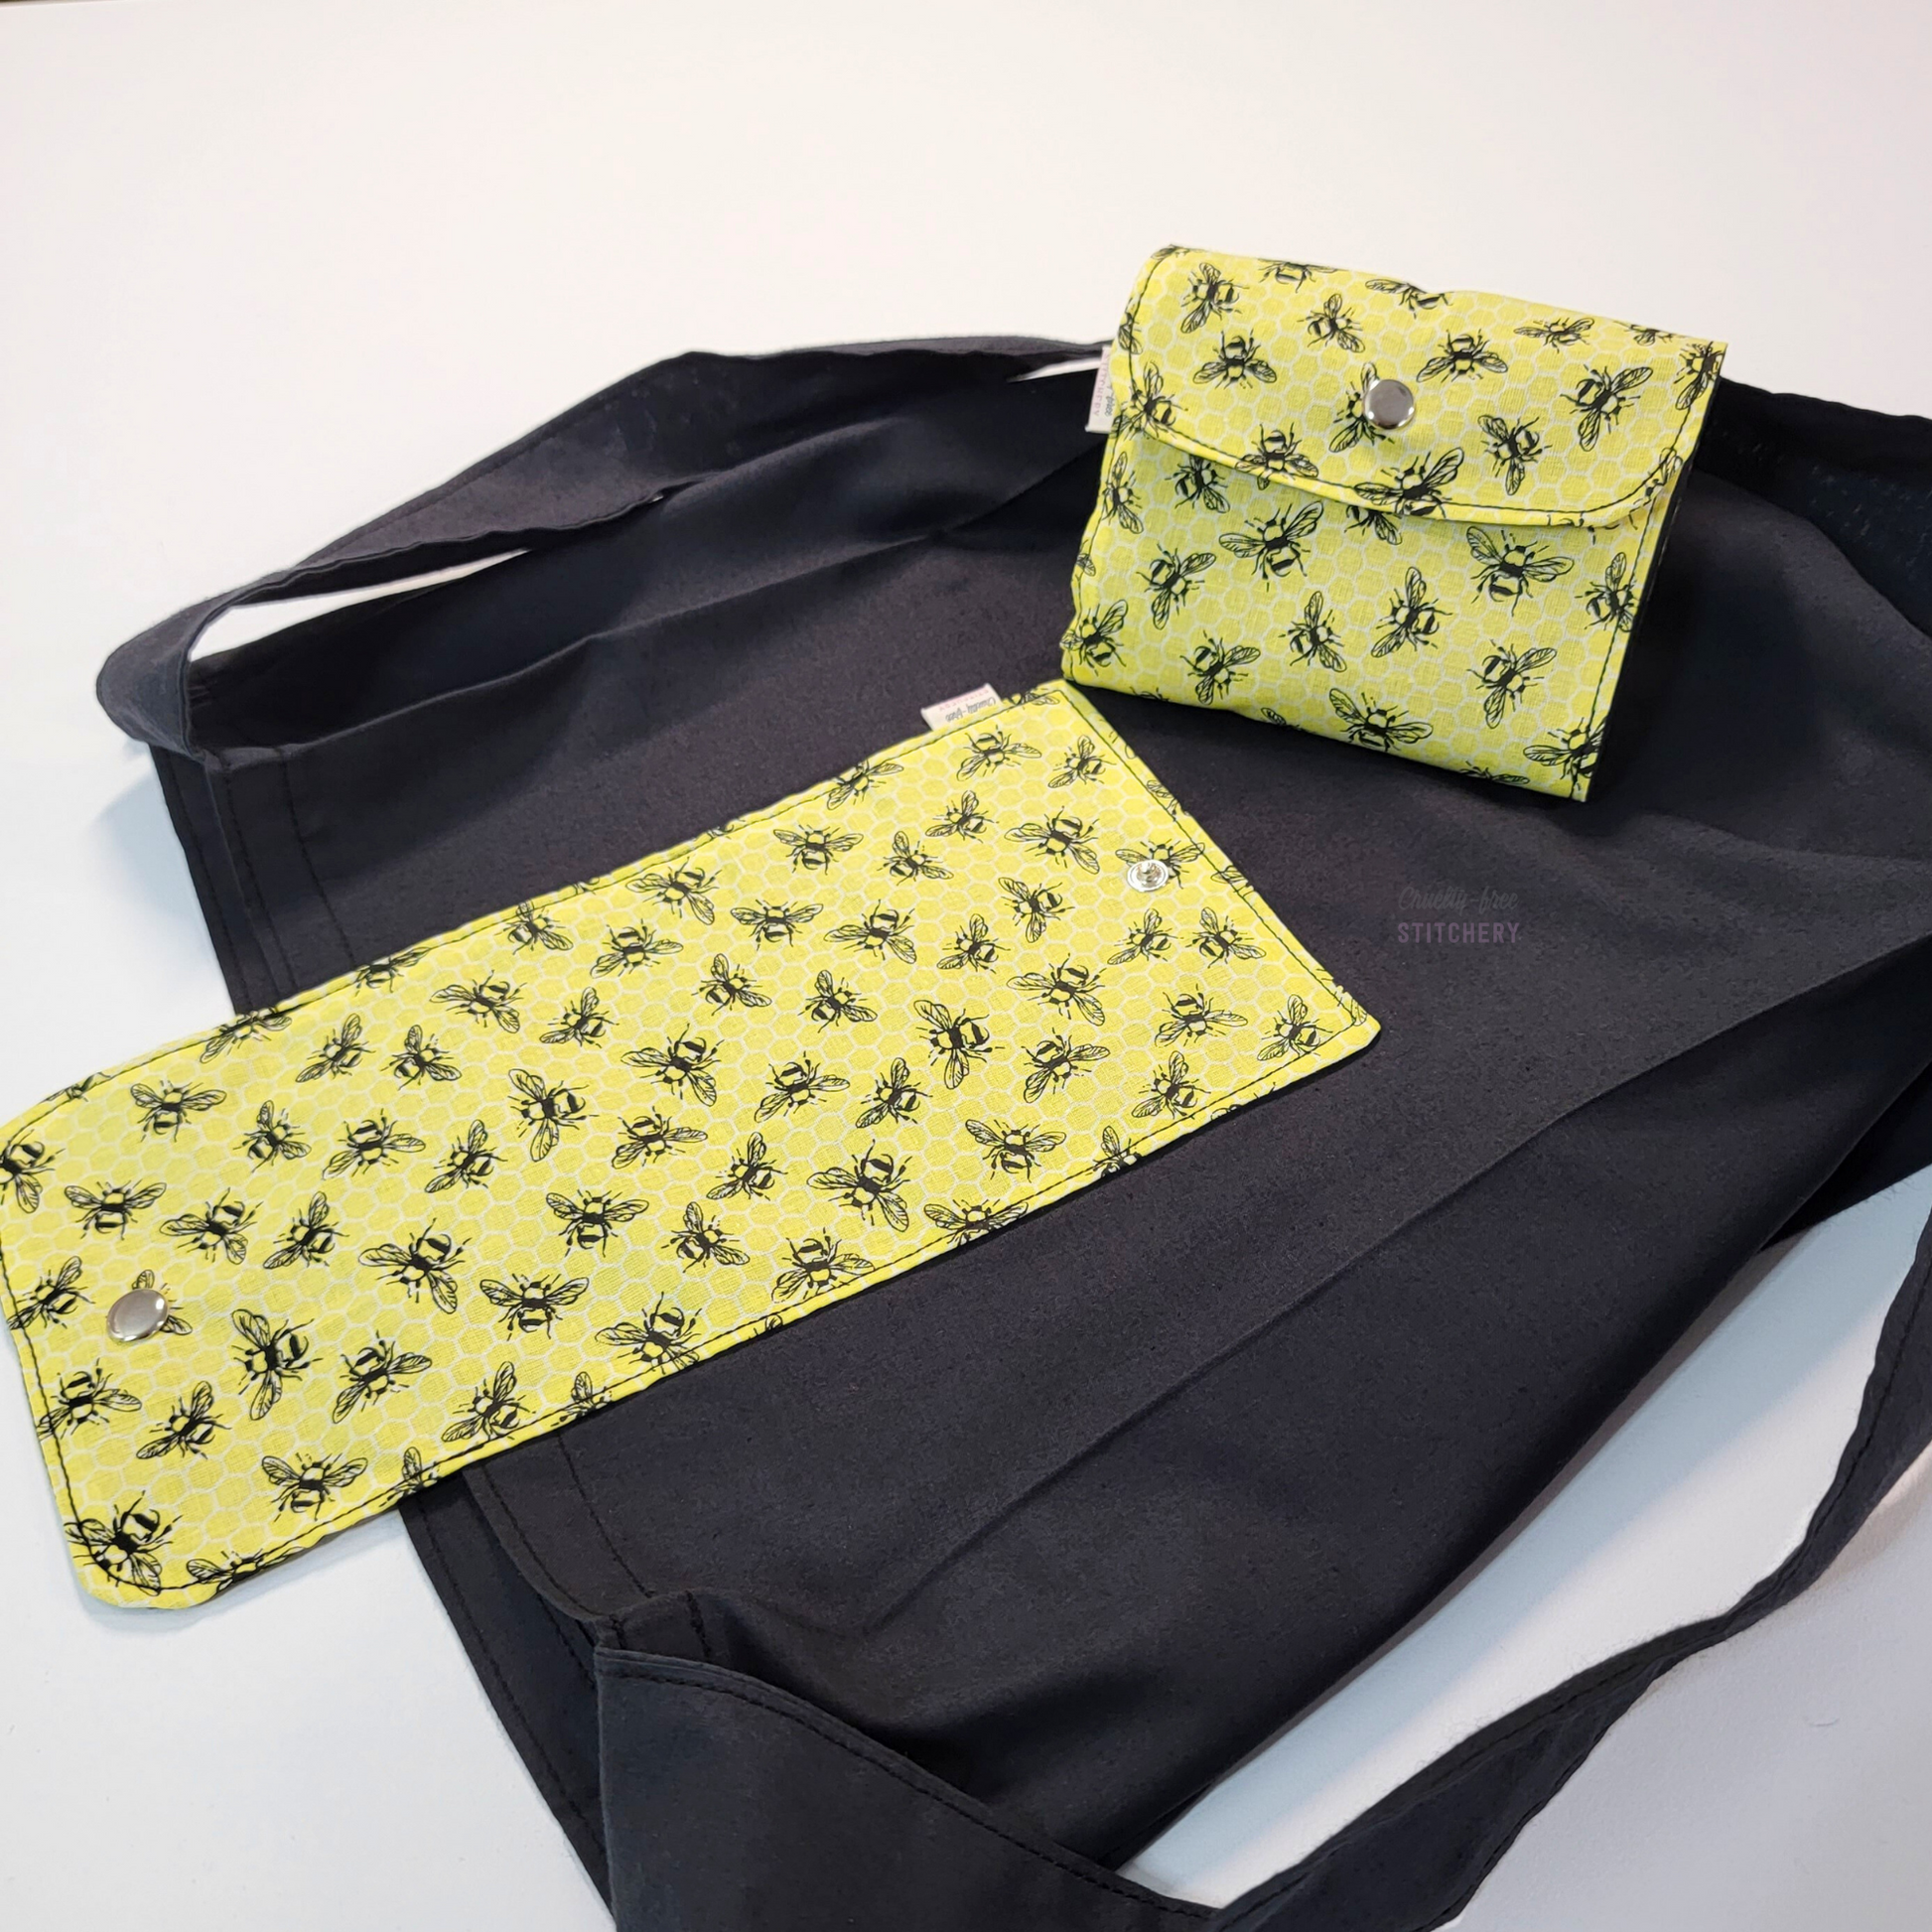 A solid black tote bag with a long strap and a yellow flap printed with small black sketched bees. On top of the bag is another bag that has been folded up and snapped together like a wallet.